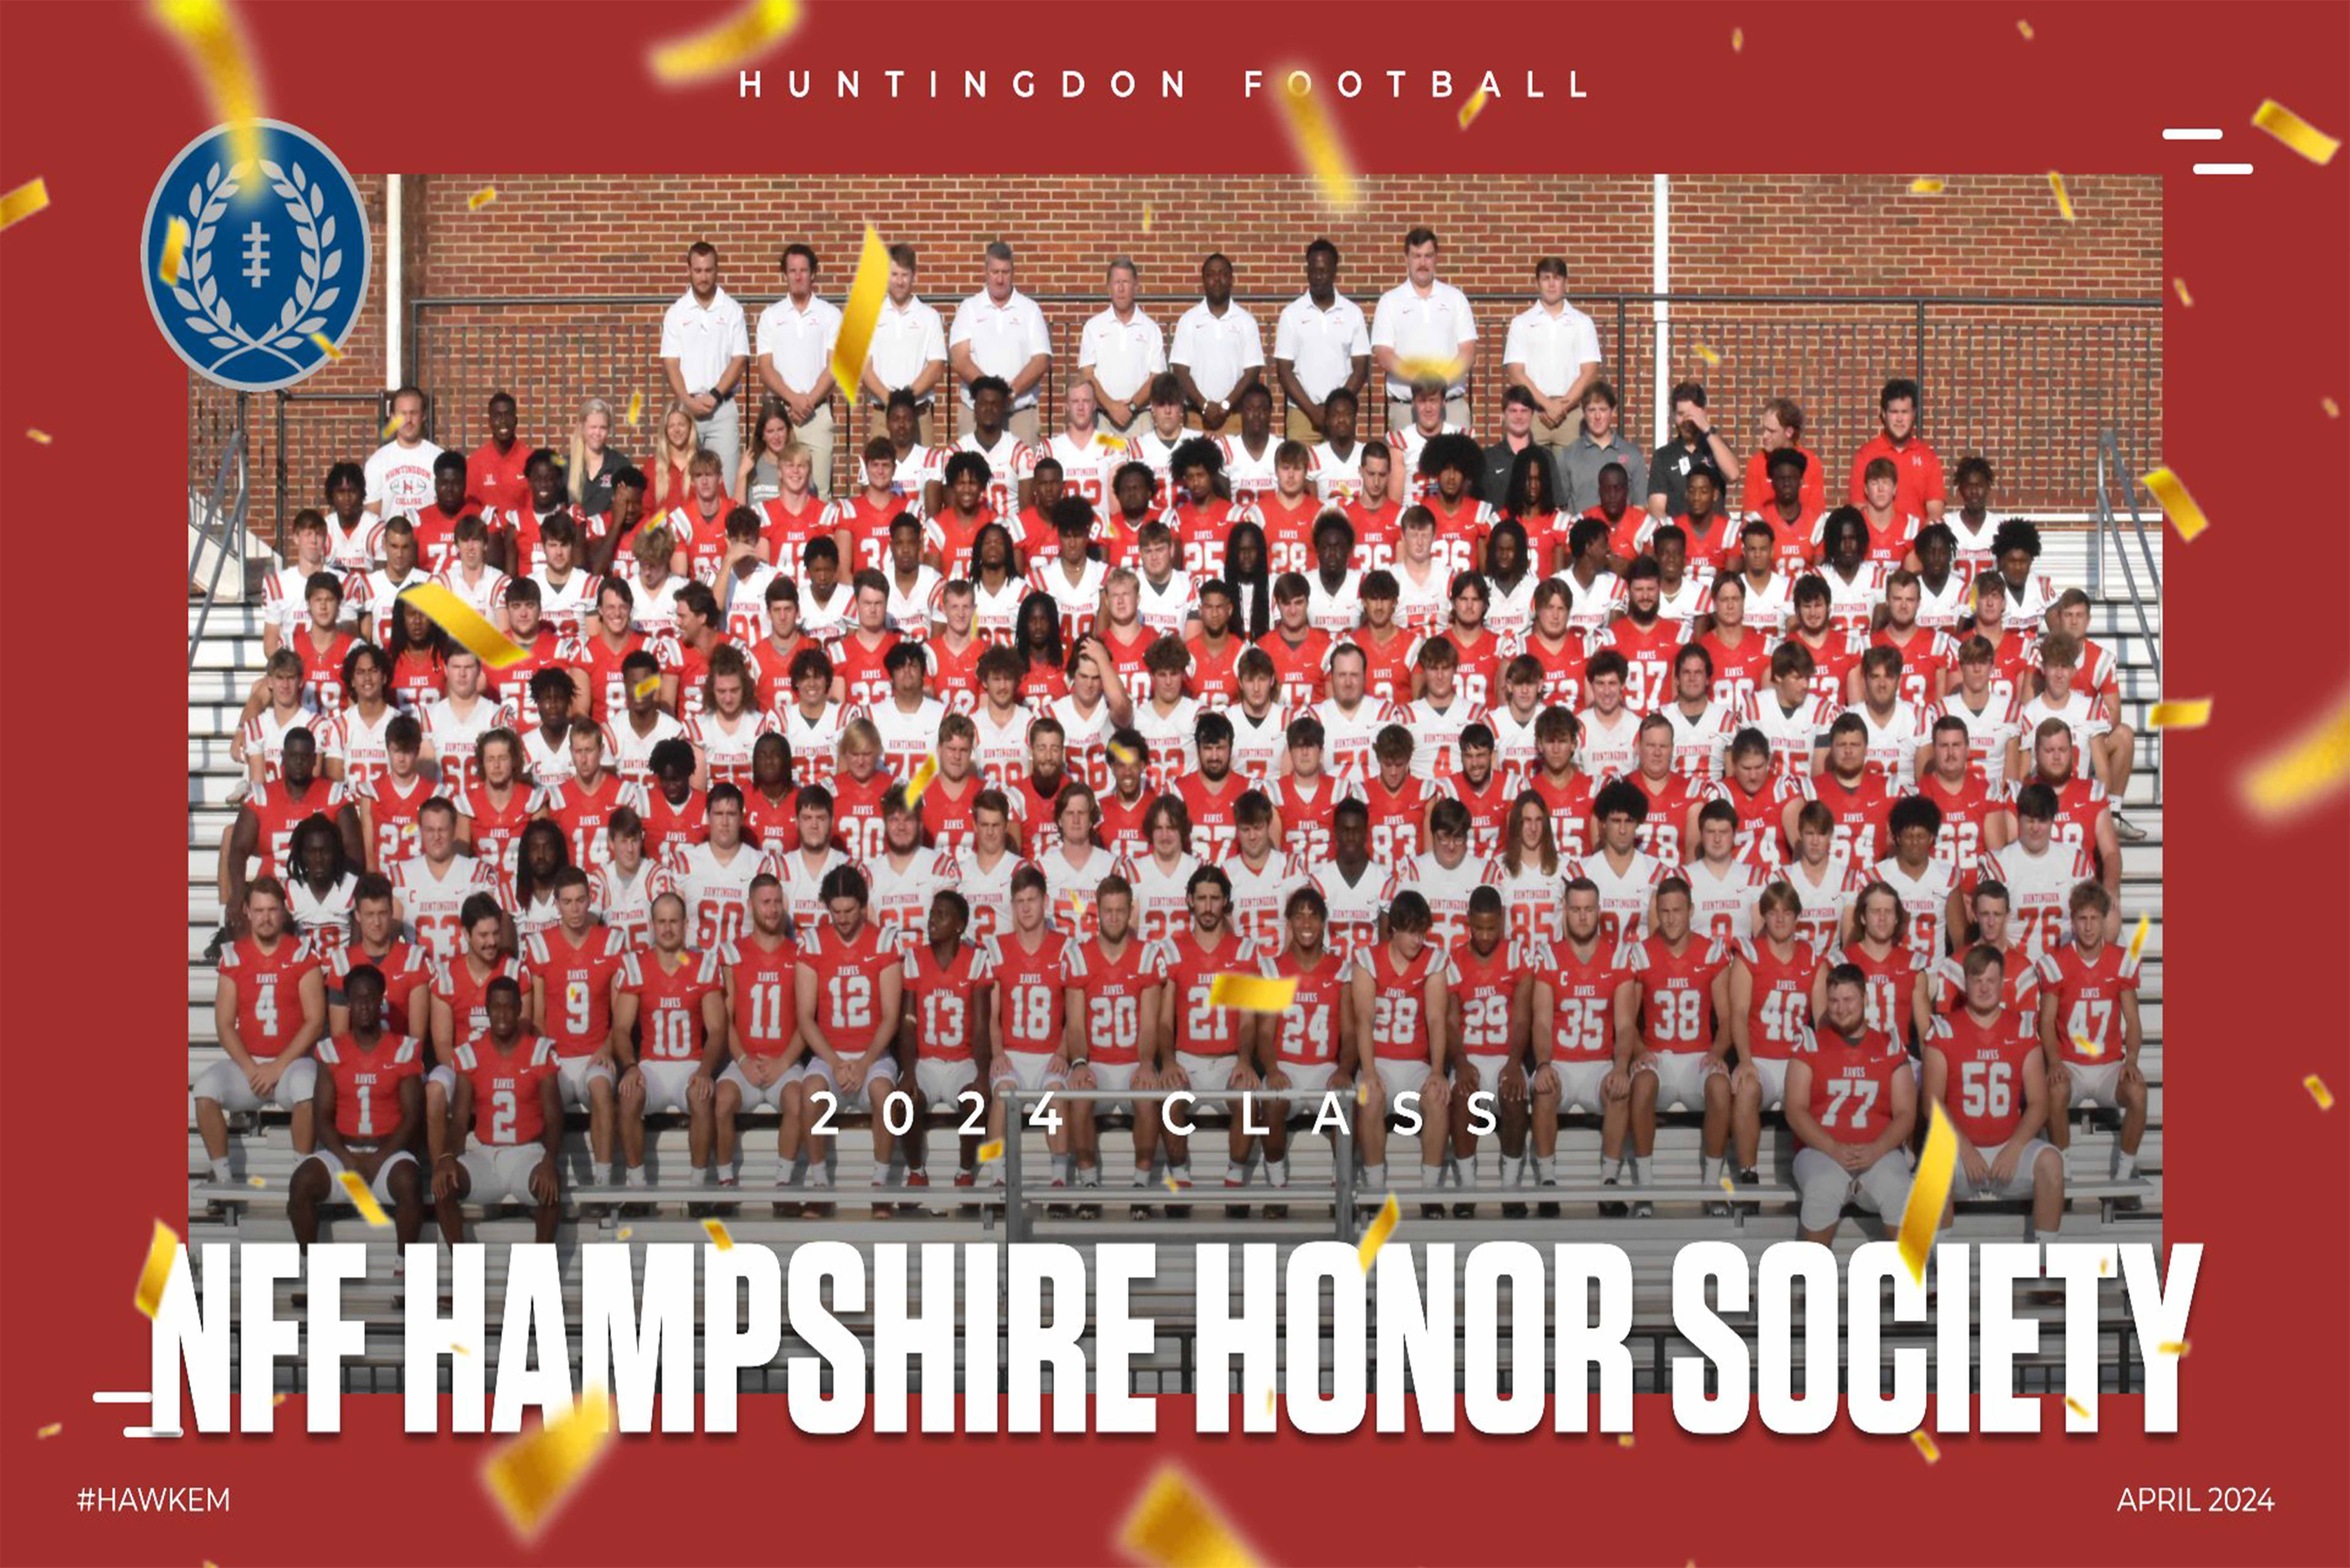 14 Hawks Selected To NFF Hampshire Honor Society